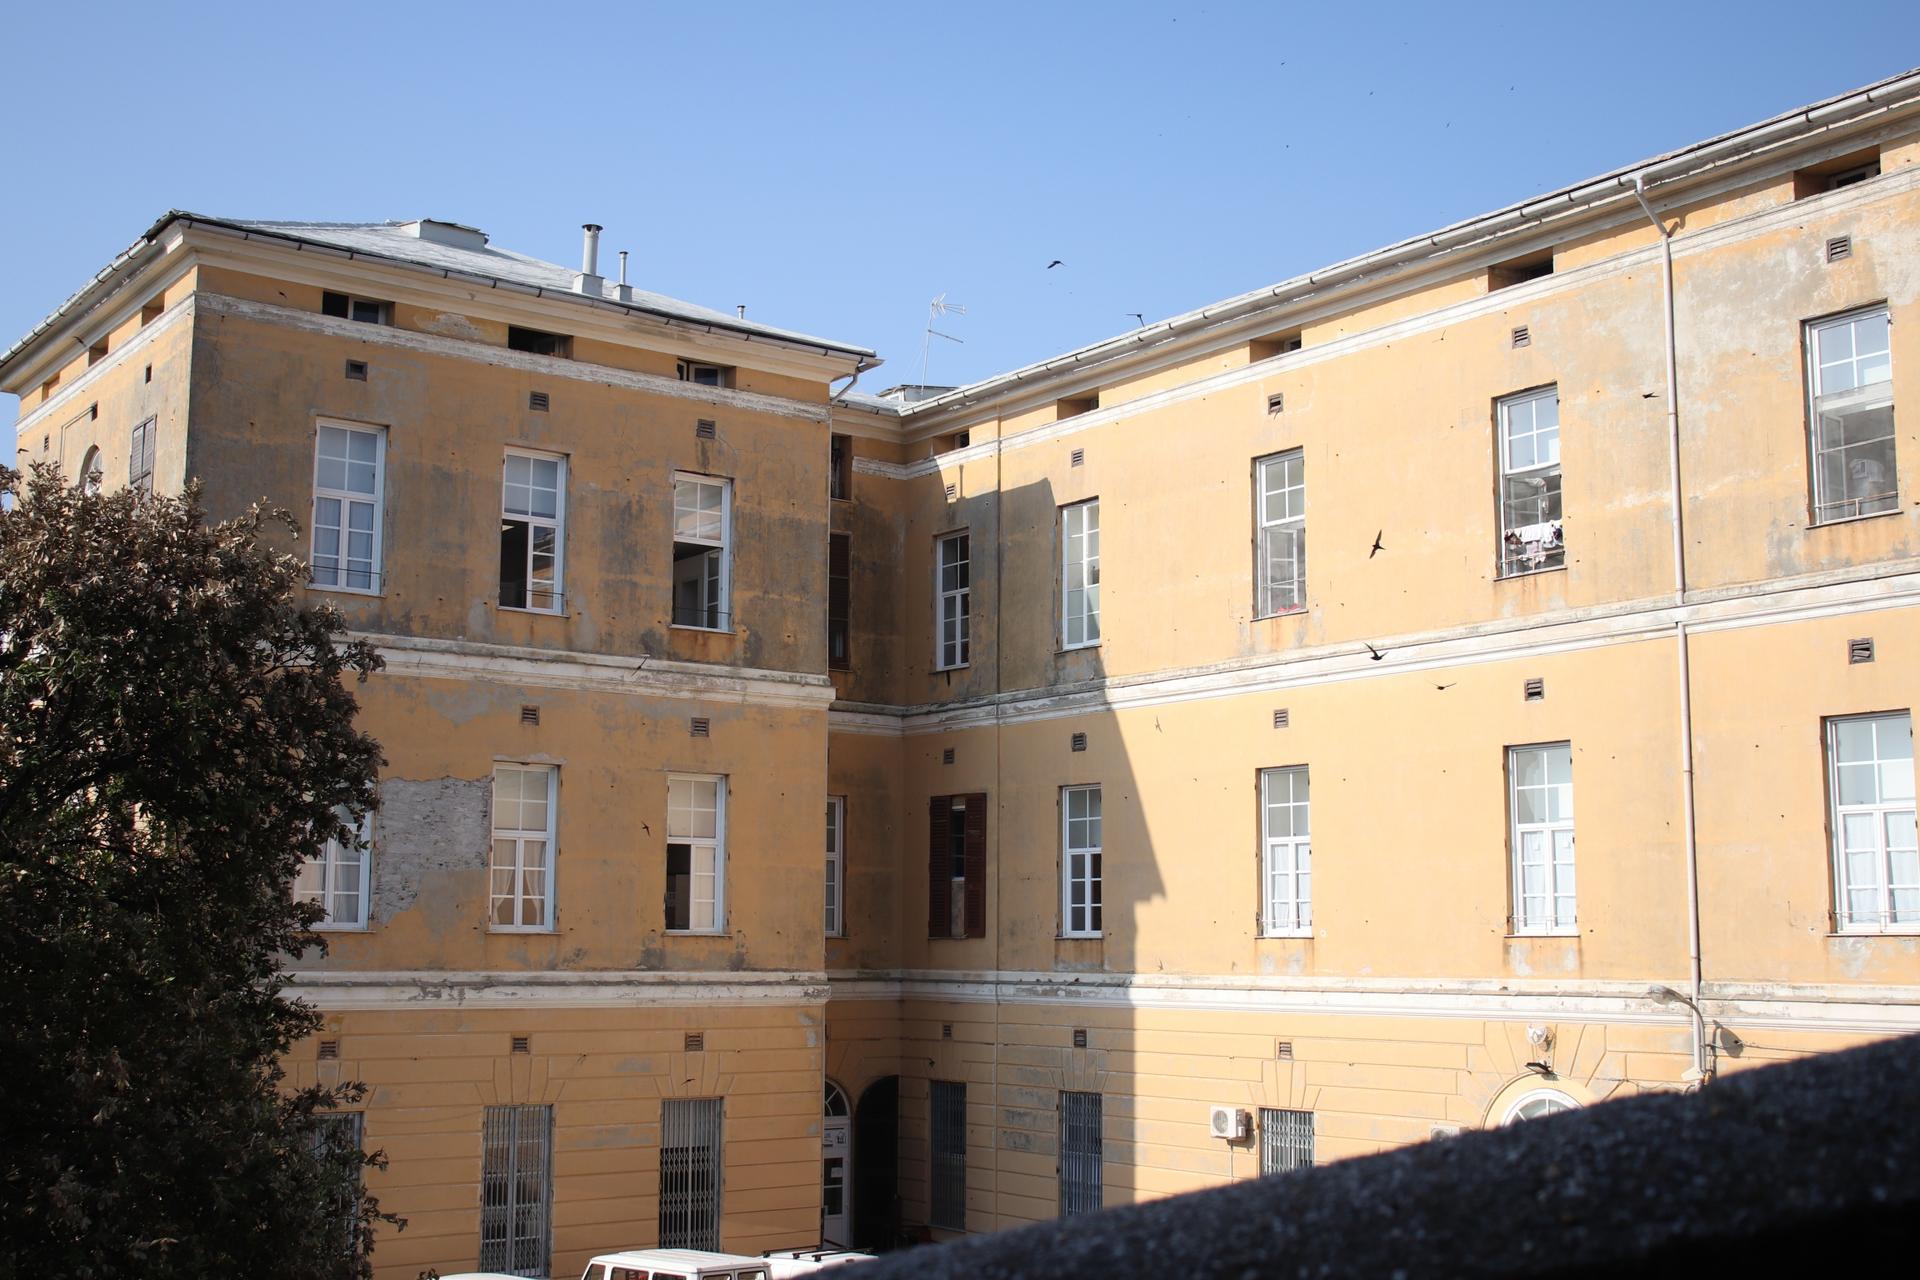 an old hospital in italy has become a refugee center